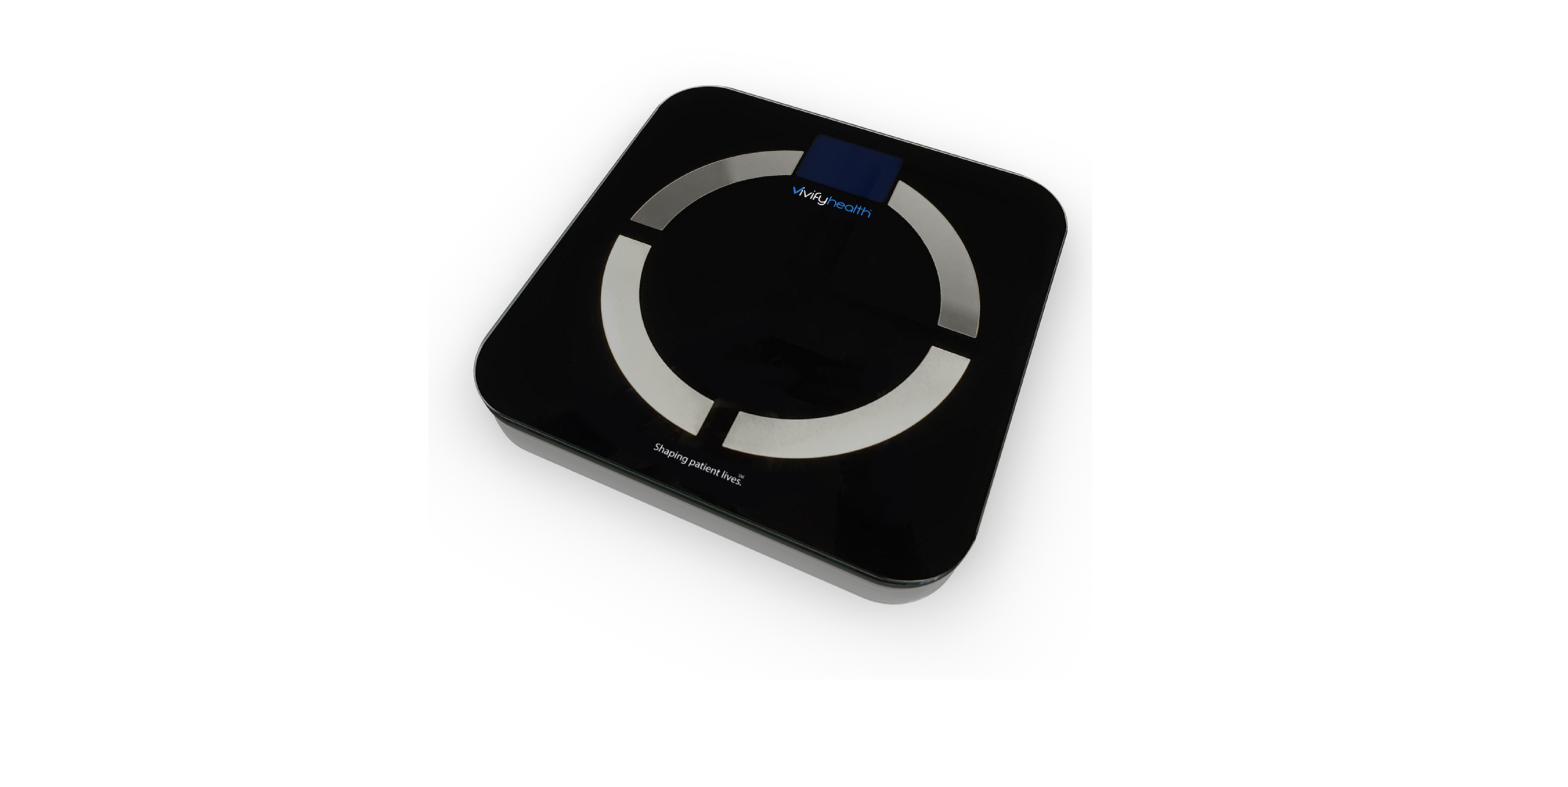 Vivifyhealth AnD Weight Scale User Guide